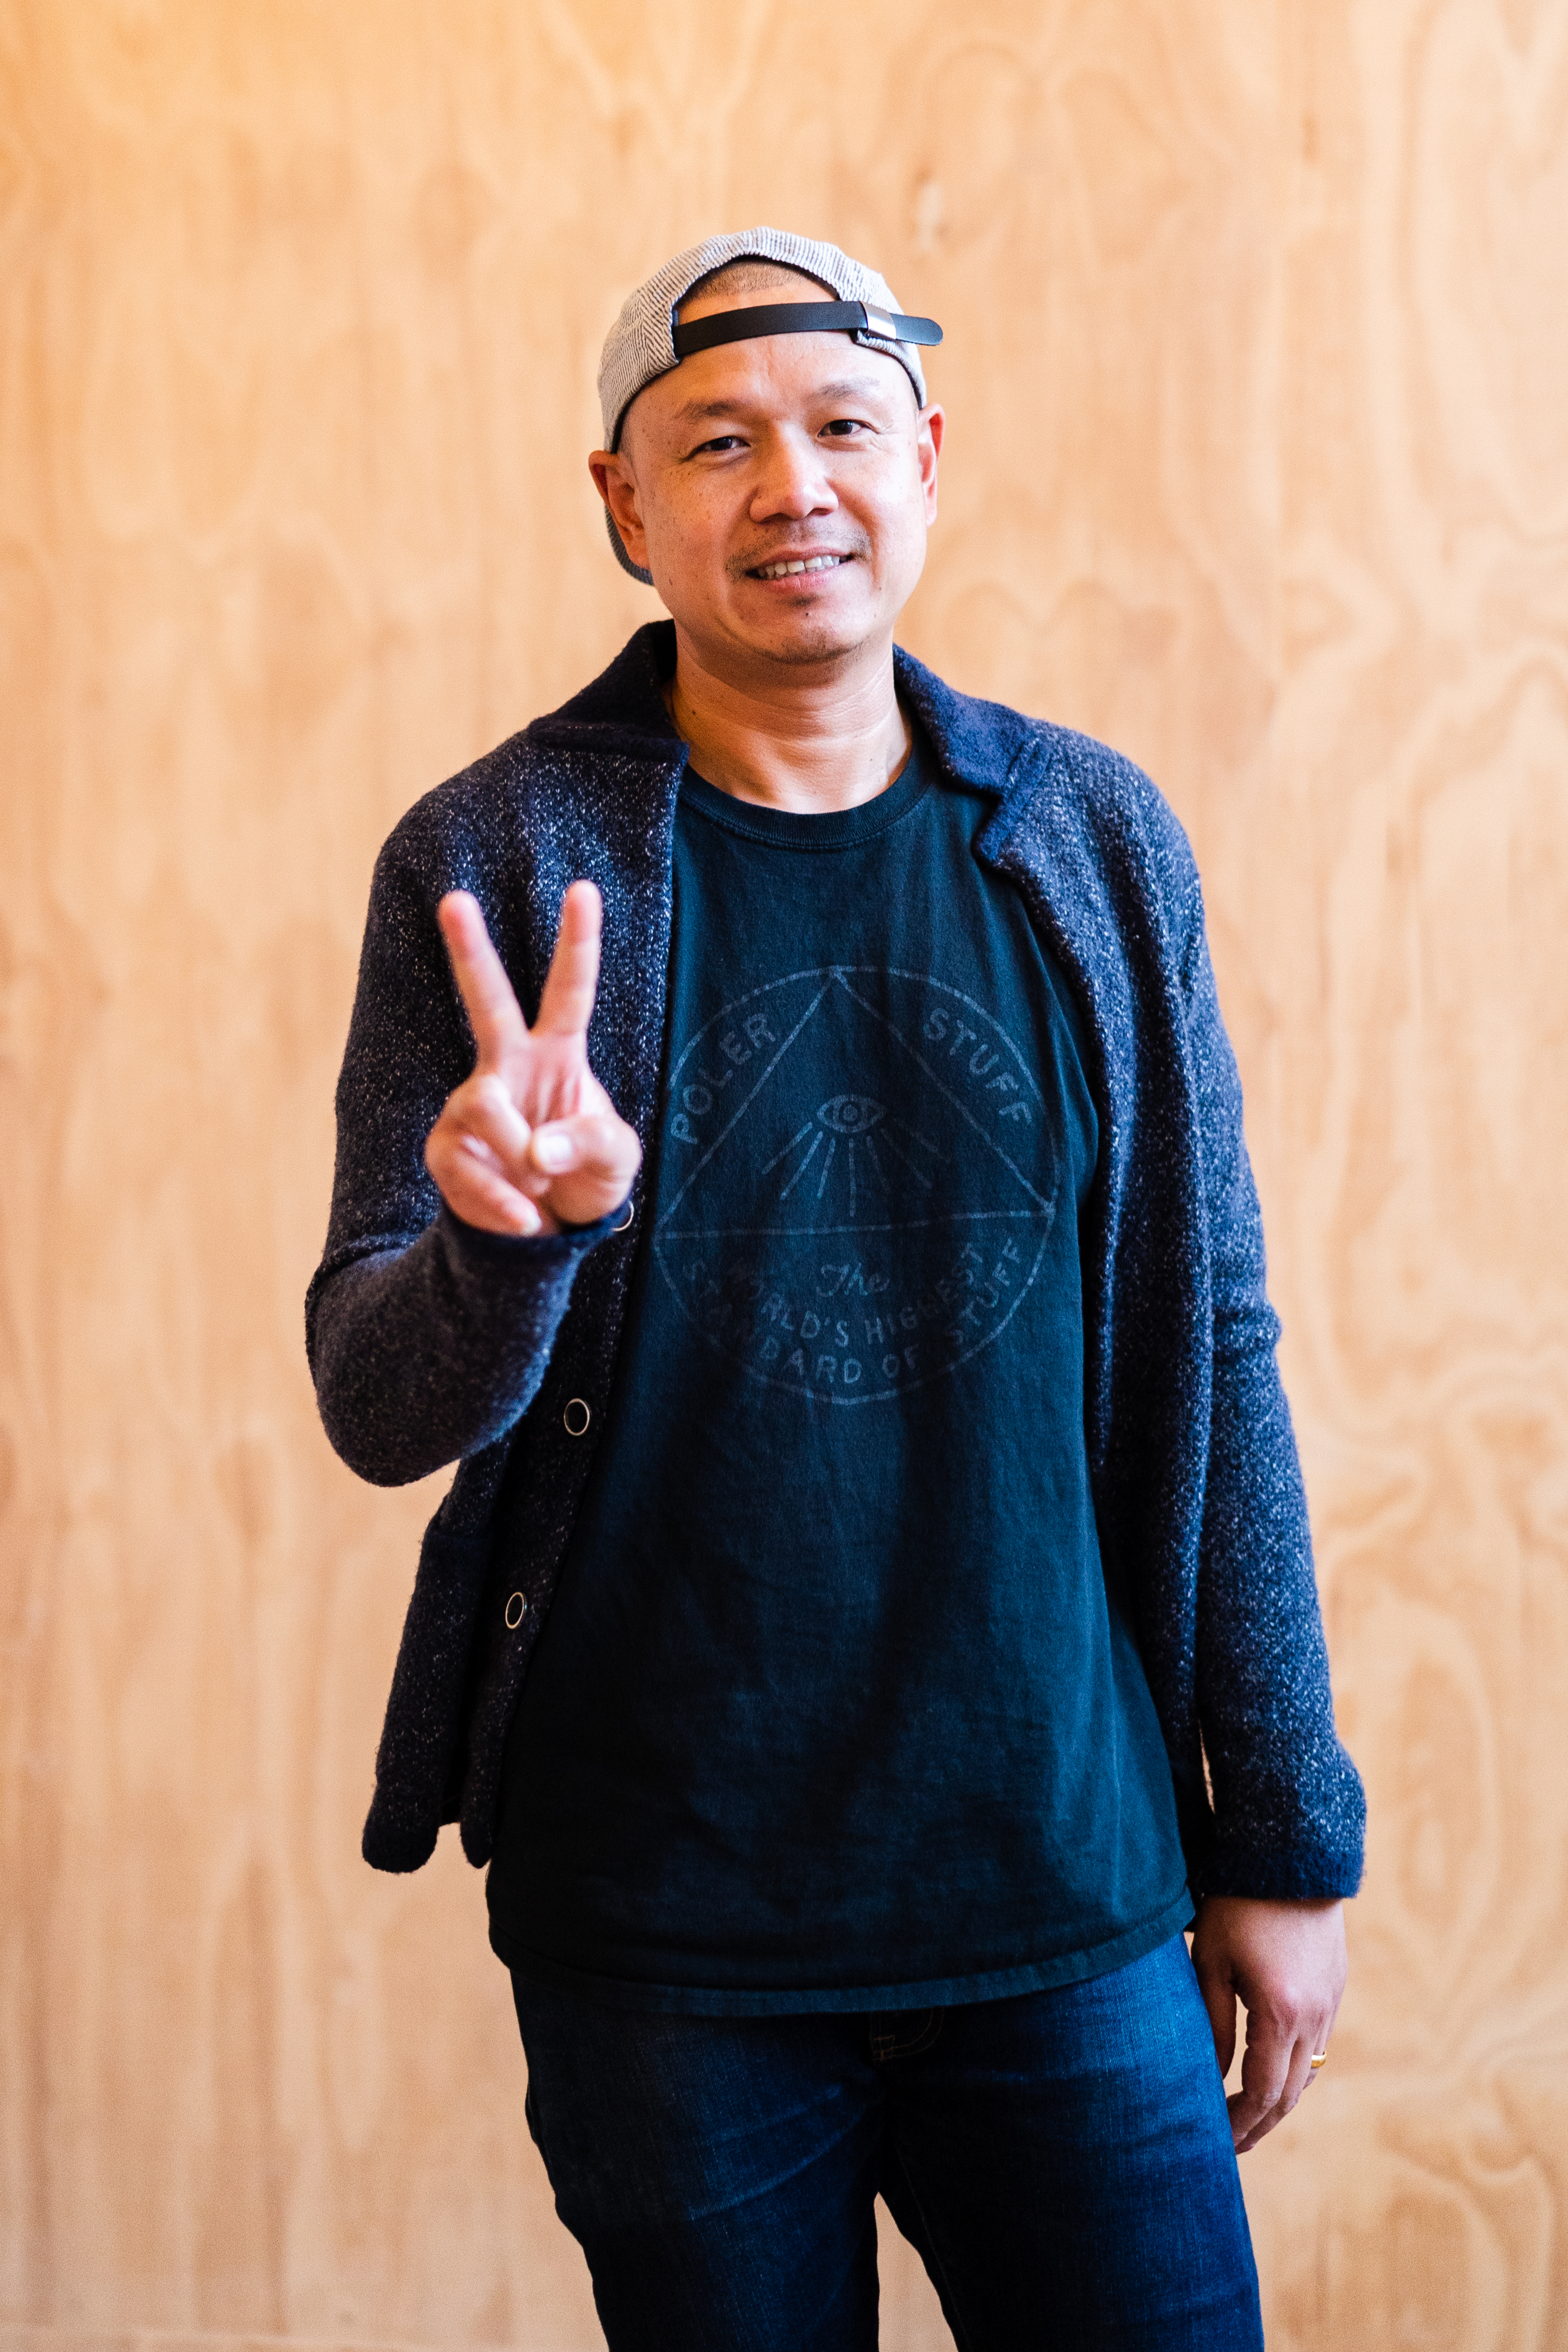 A 40-year-old Earl Ninsom stands in front of a wooden wall, holding up a peace sign. He’s wearing a loose jacket, a t-shirt, and a backwards snapback cap, with a smile.